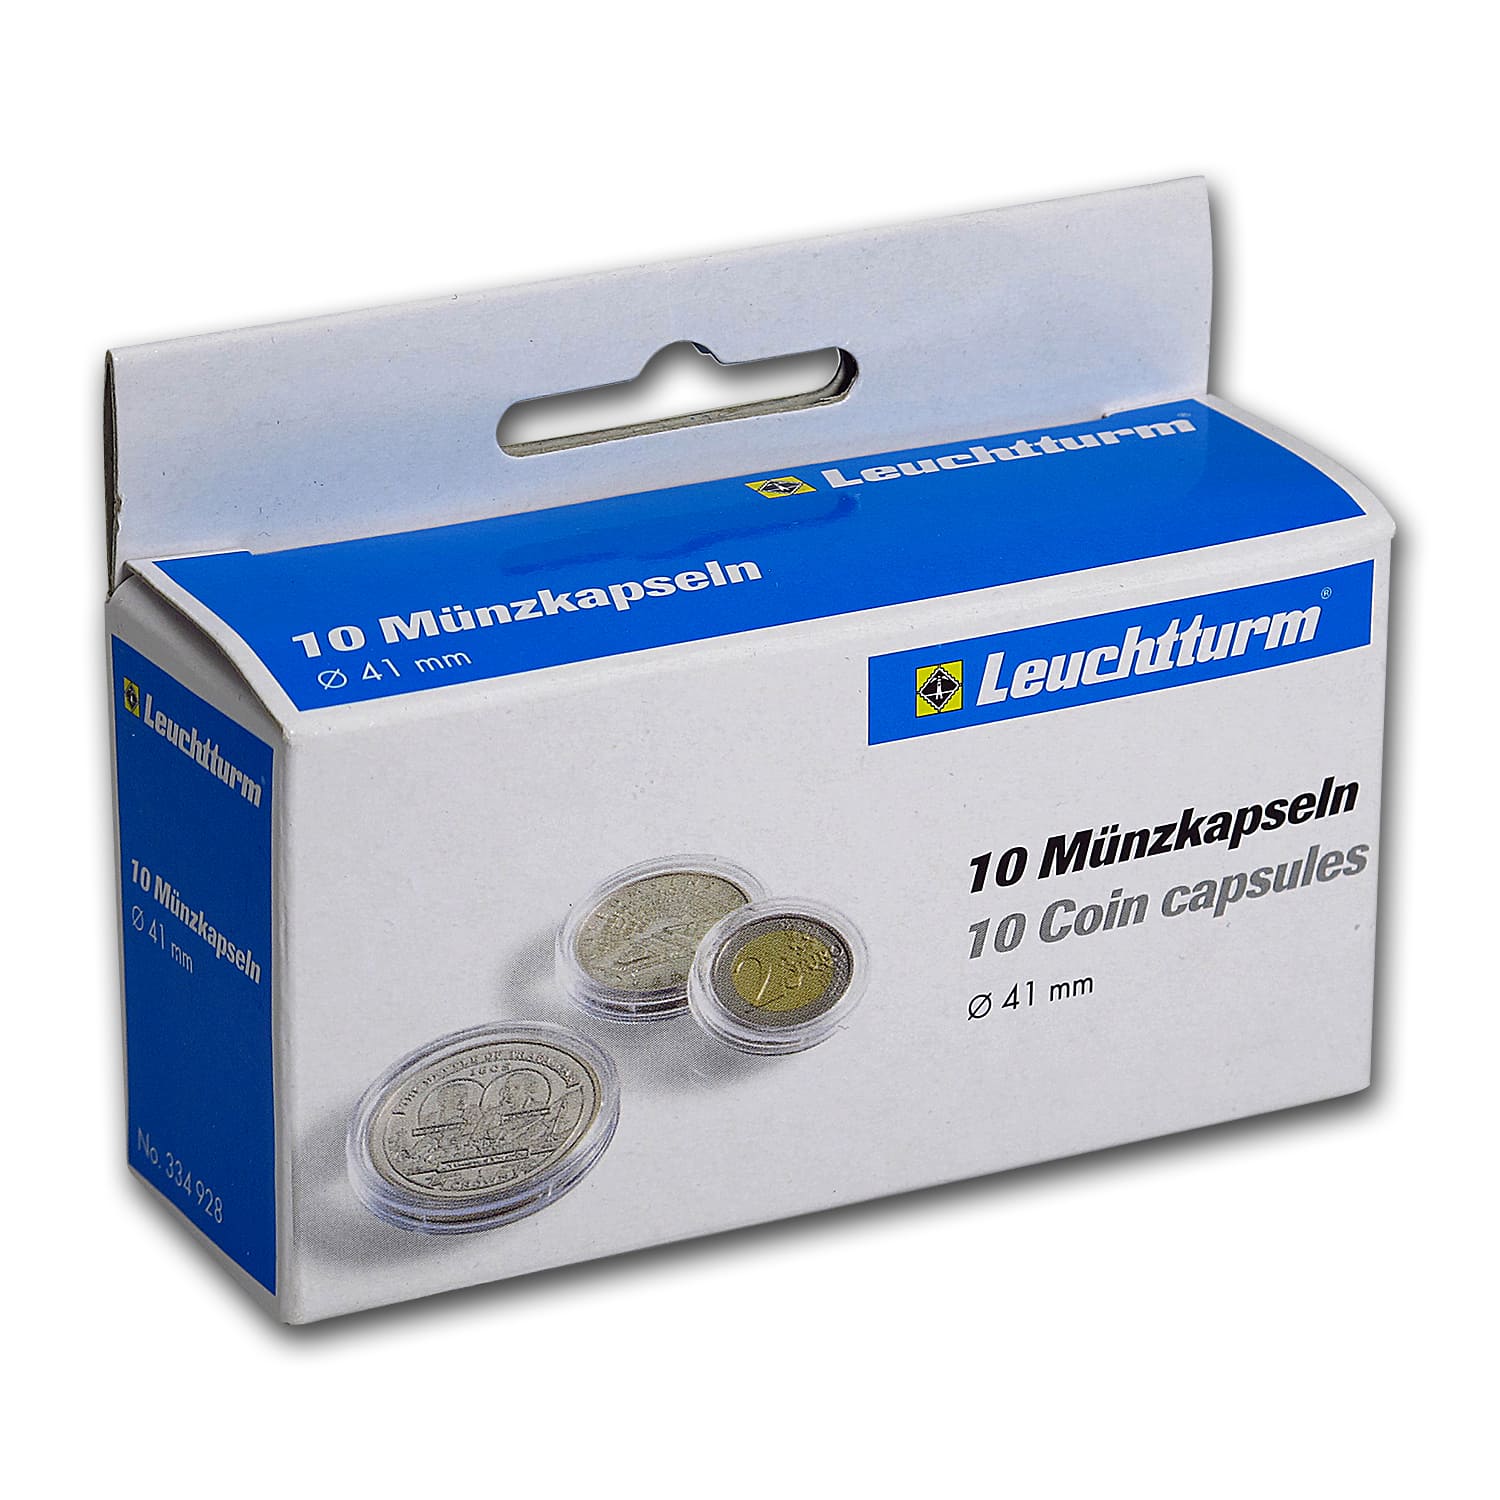 Buy Lighthouse Capsules - 41 mm (10 count Packs)